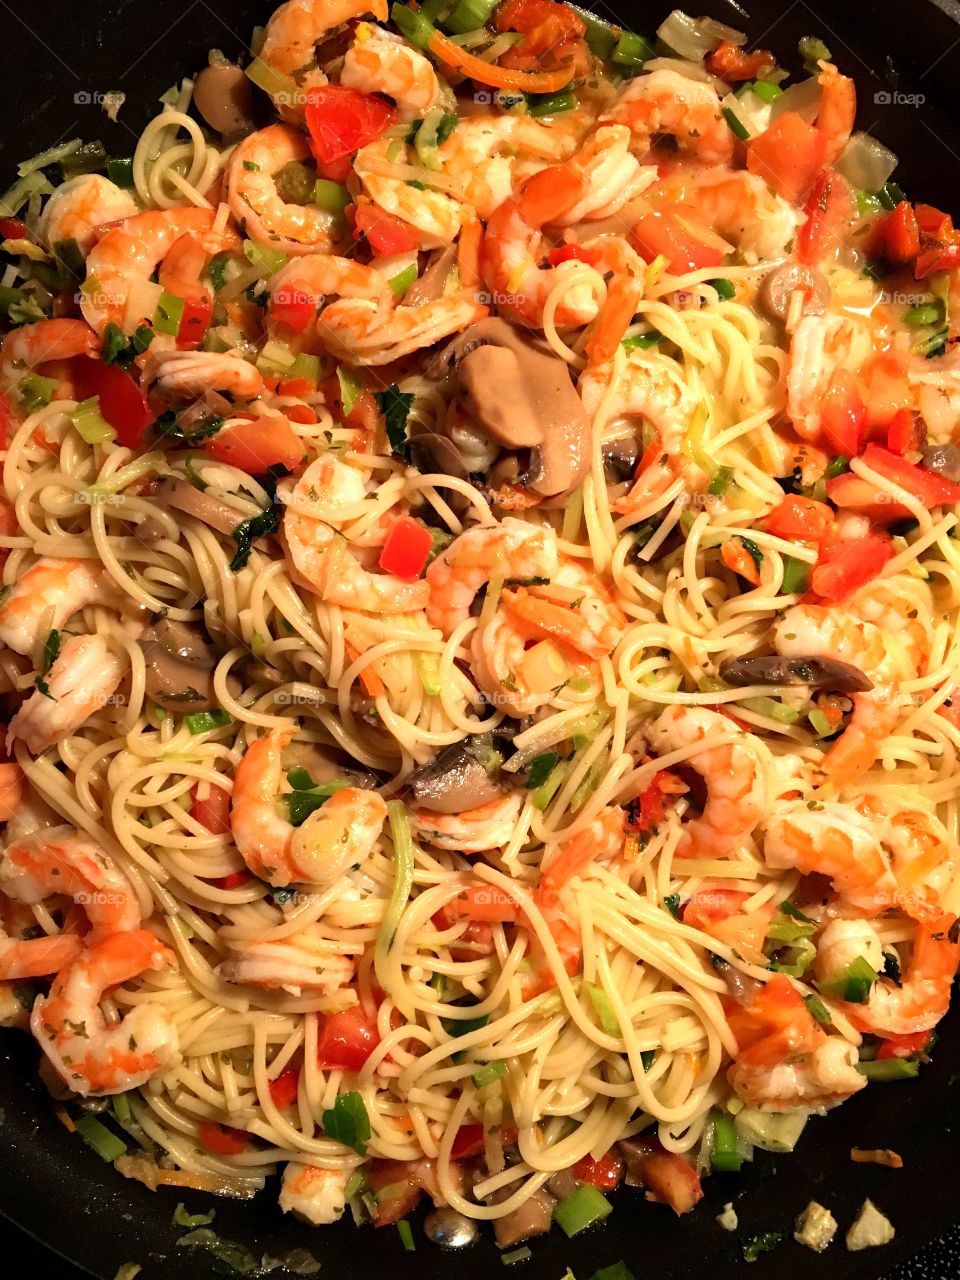 Shrimp and vegetables with pasta